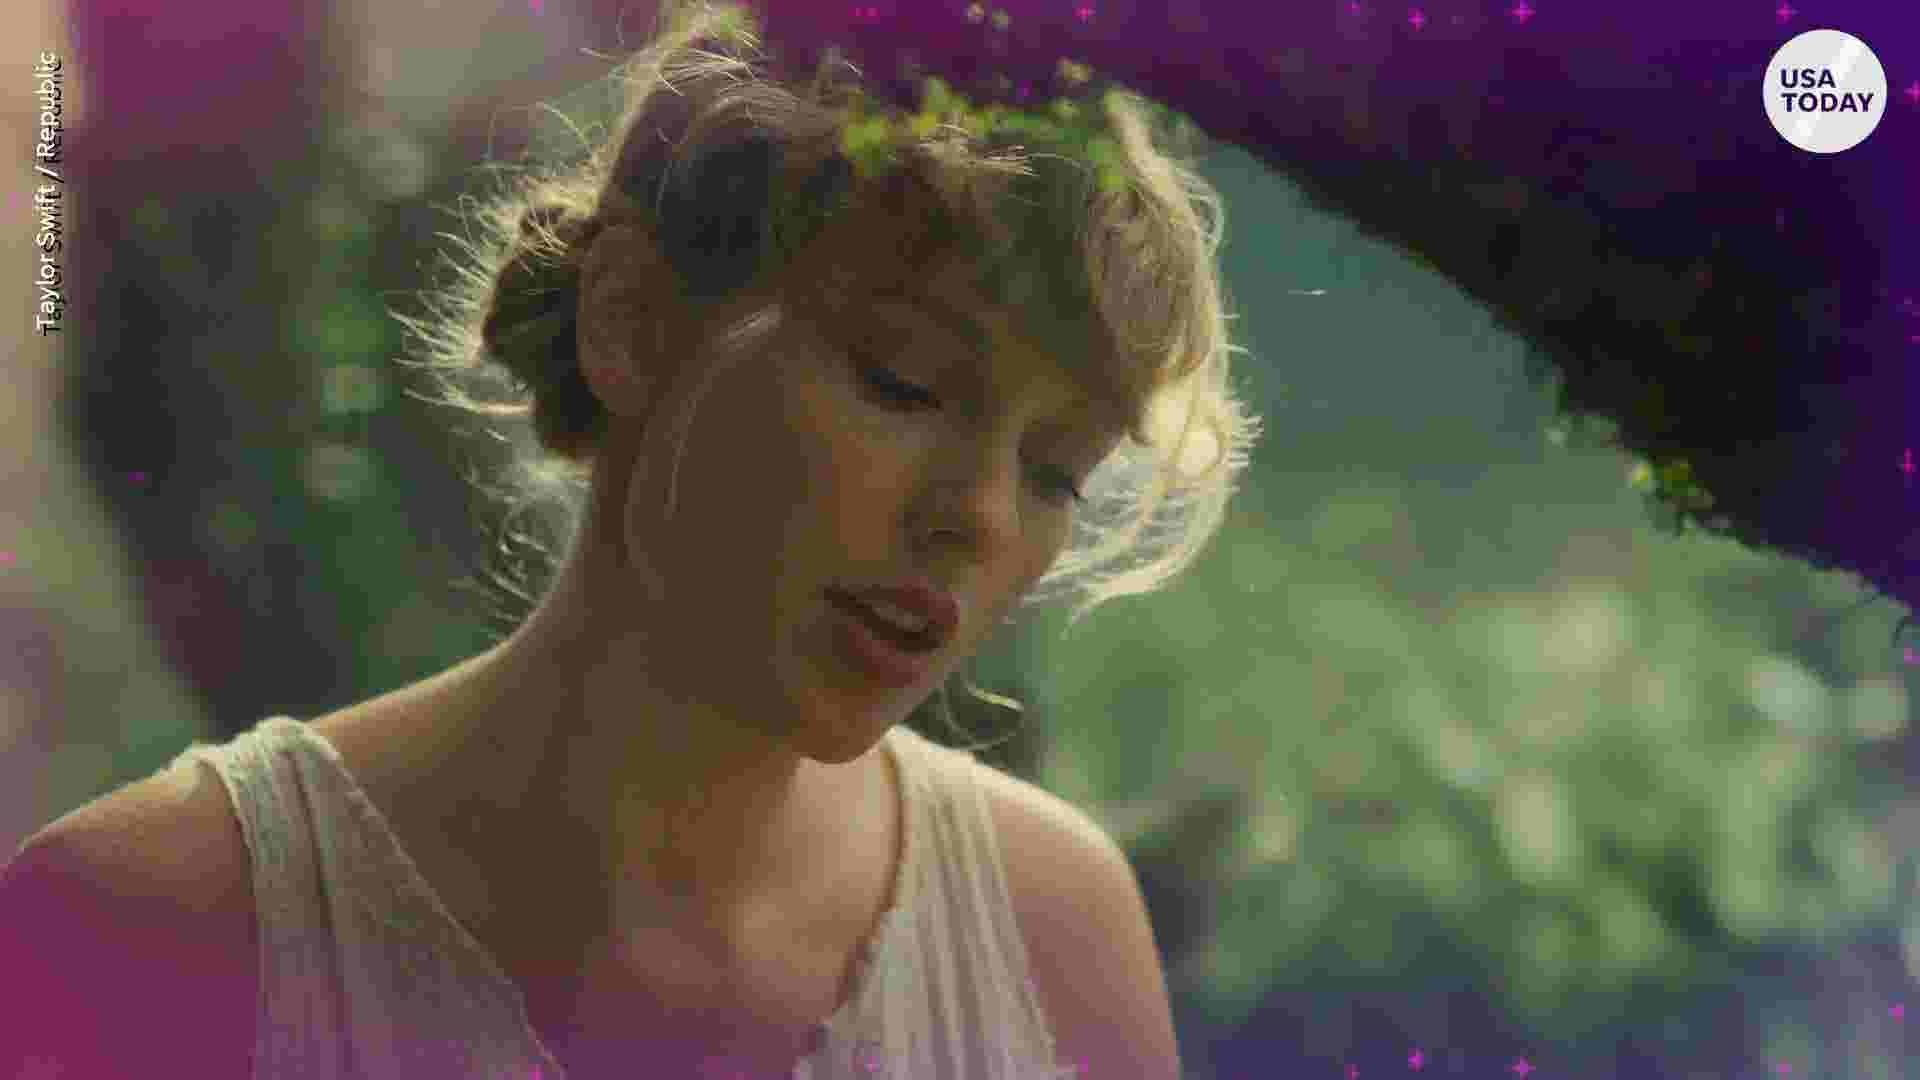 Taylor Swift's new album 'Folklore': From 'Betty' to 'Cardigan'